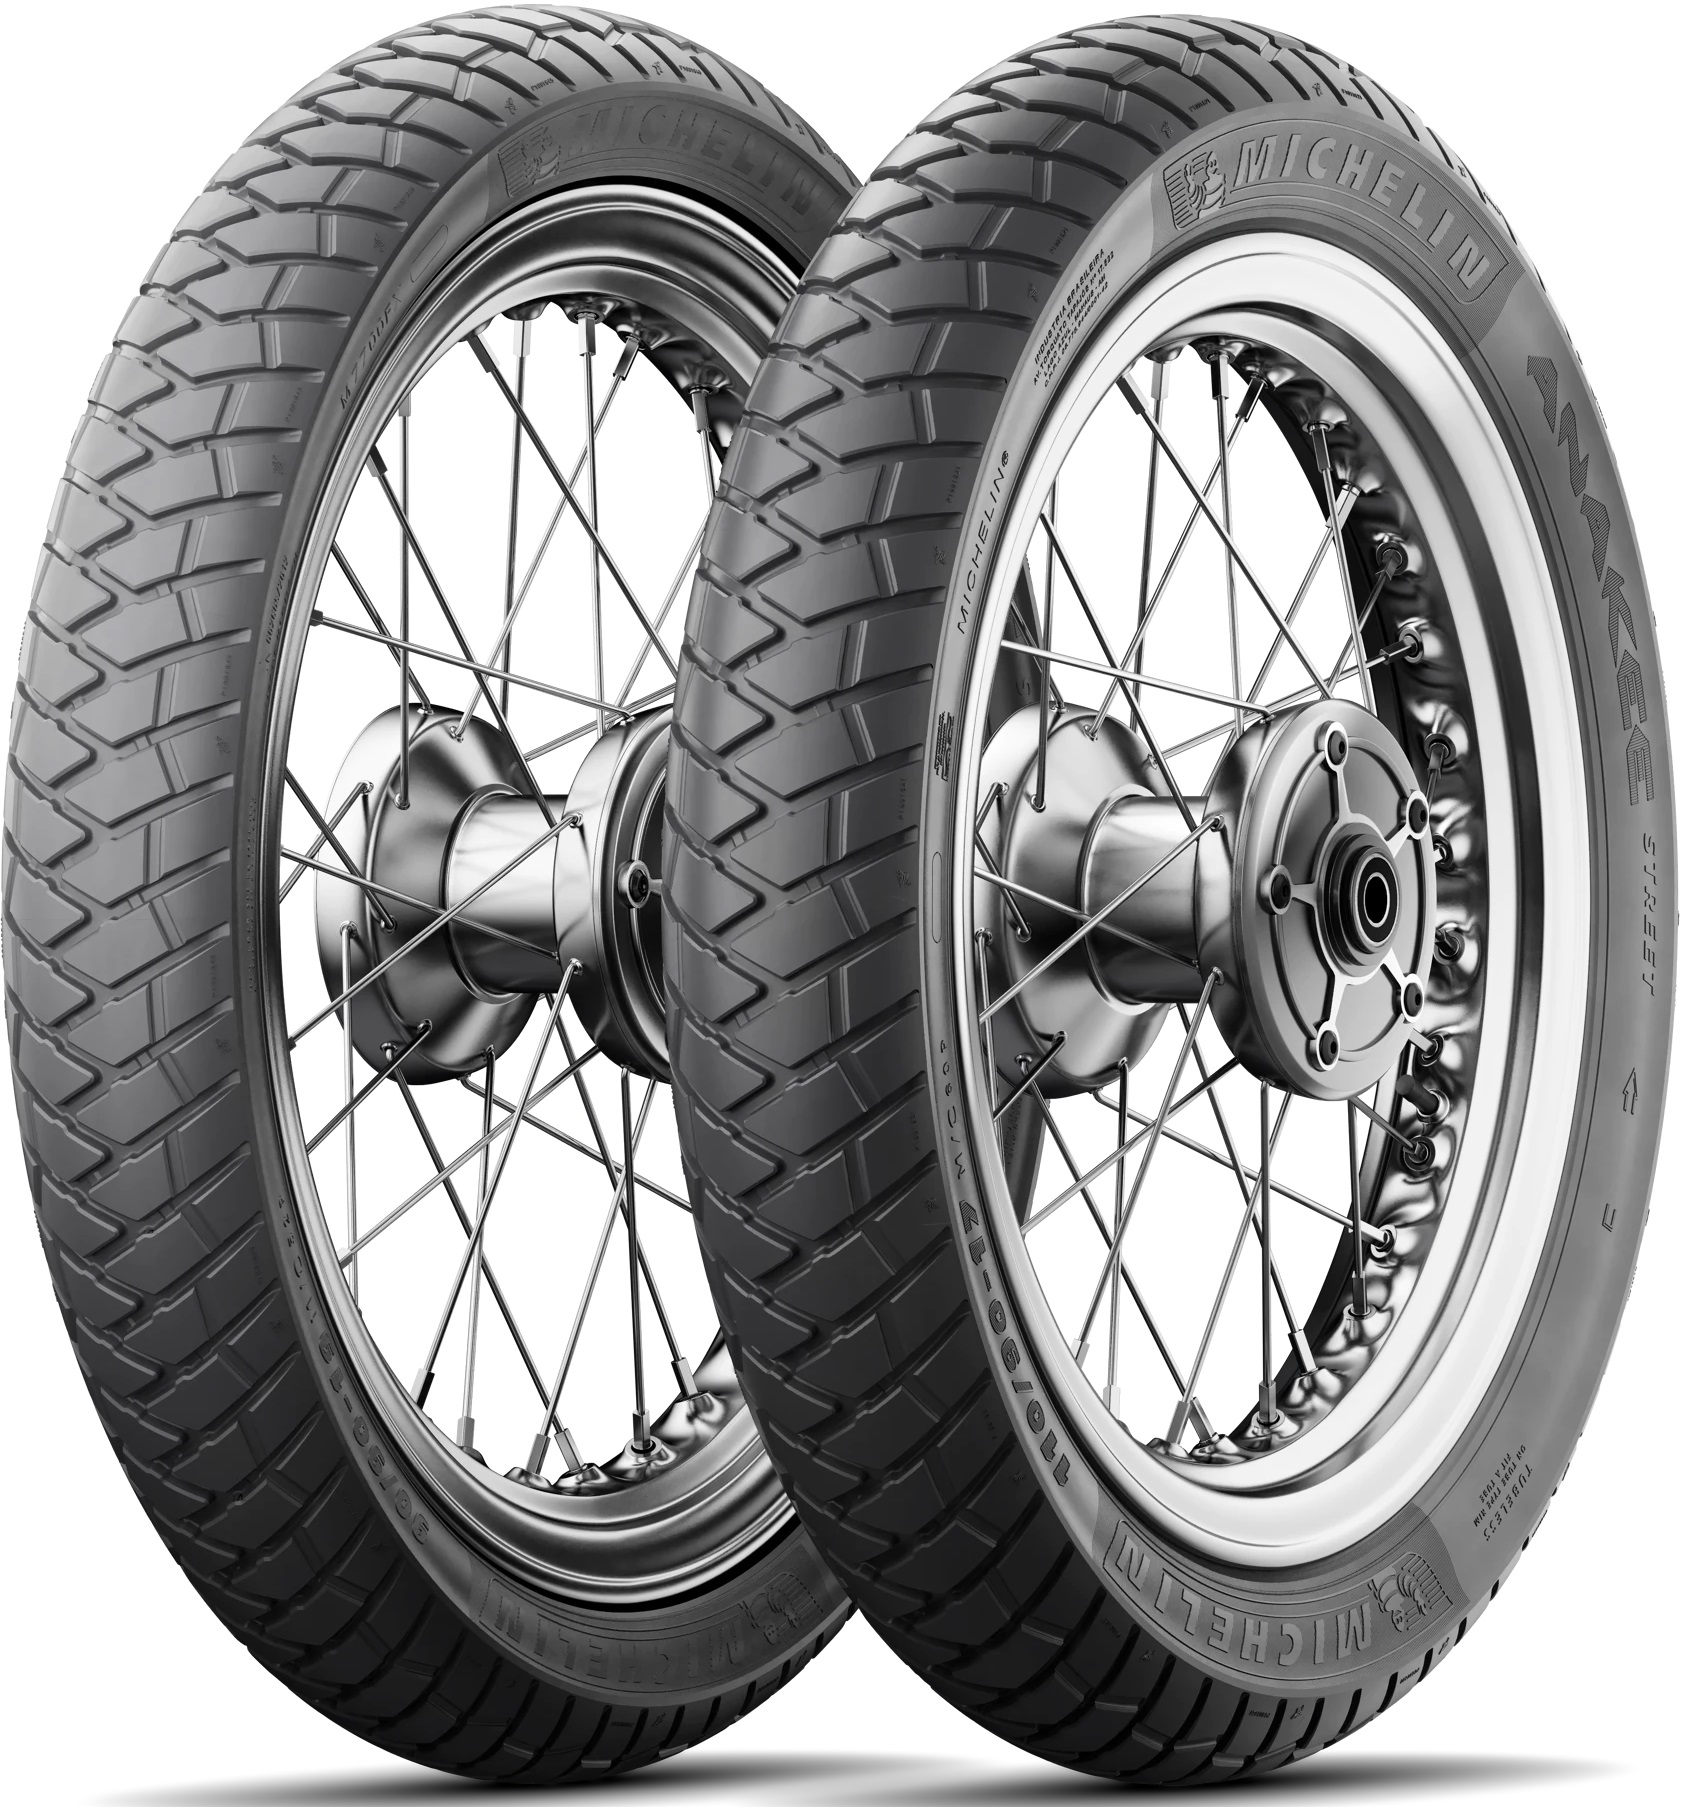 MICHELIN ANAKEE STREET 90/80 R 16 51S